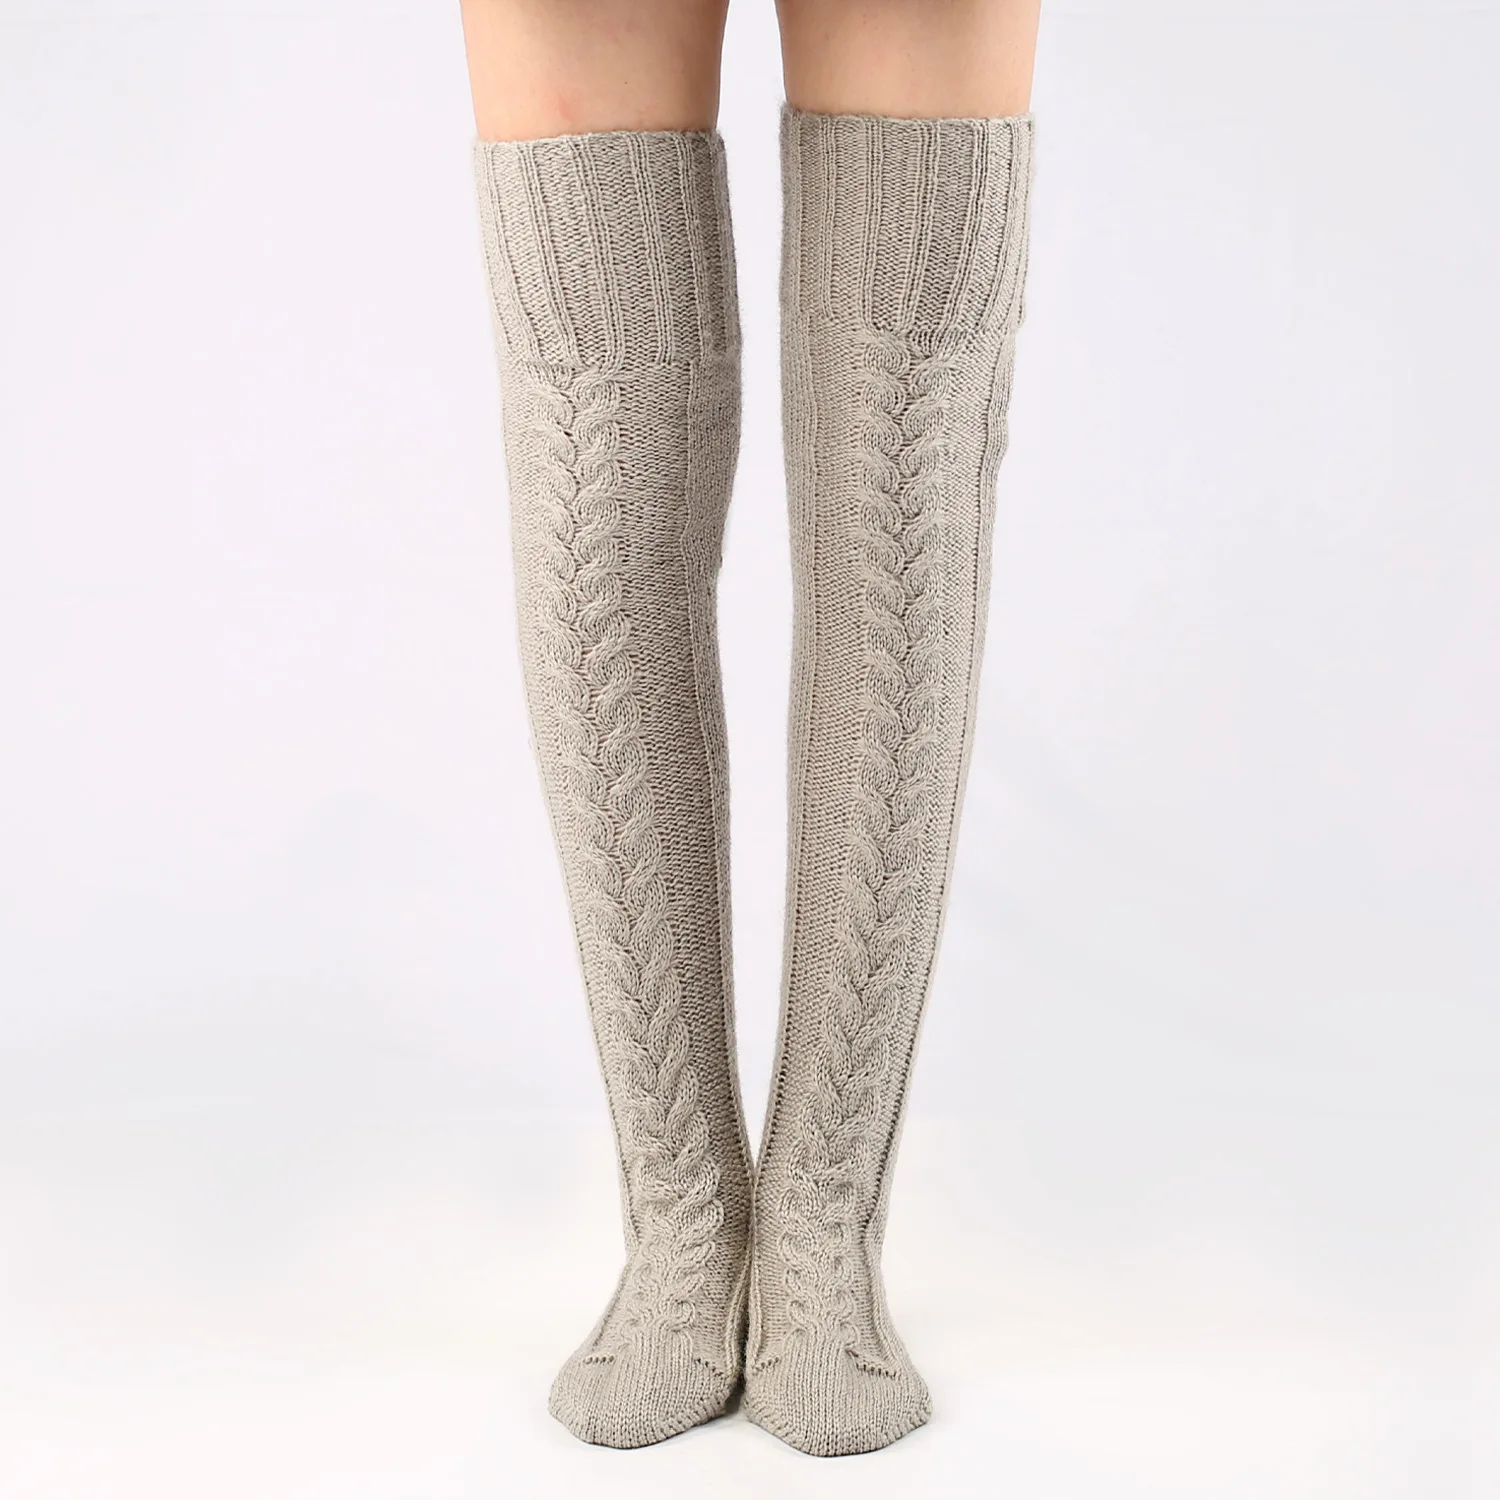 

2022 Warm Autumn Winter Sexy Long 75cm Thigh High Stocking Over Knee Students Girls Long Stockings Knitted Tights Women Socks